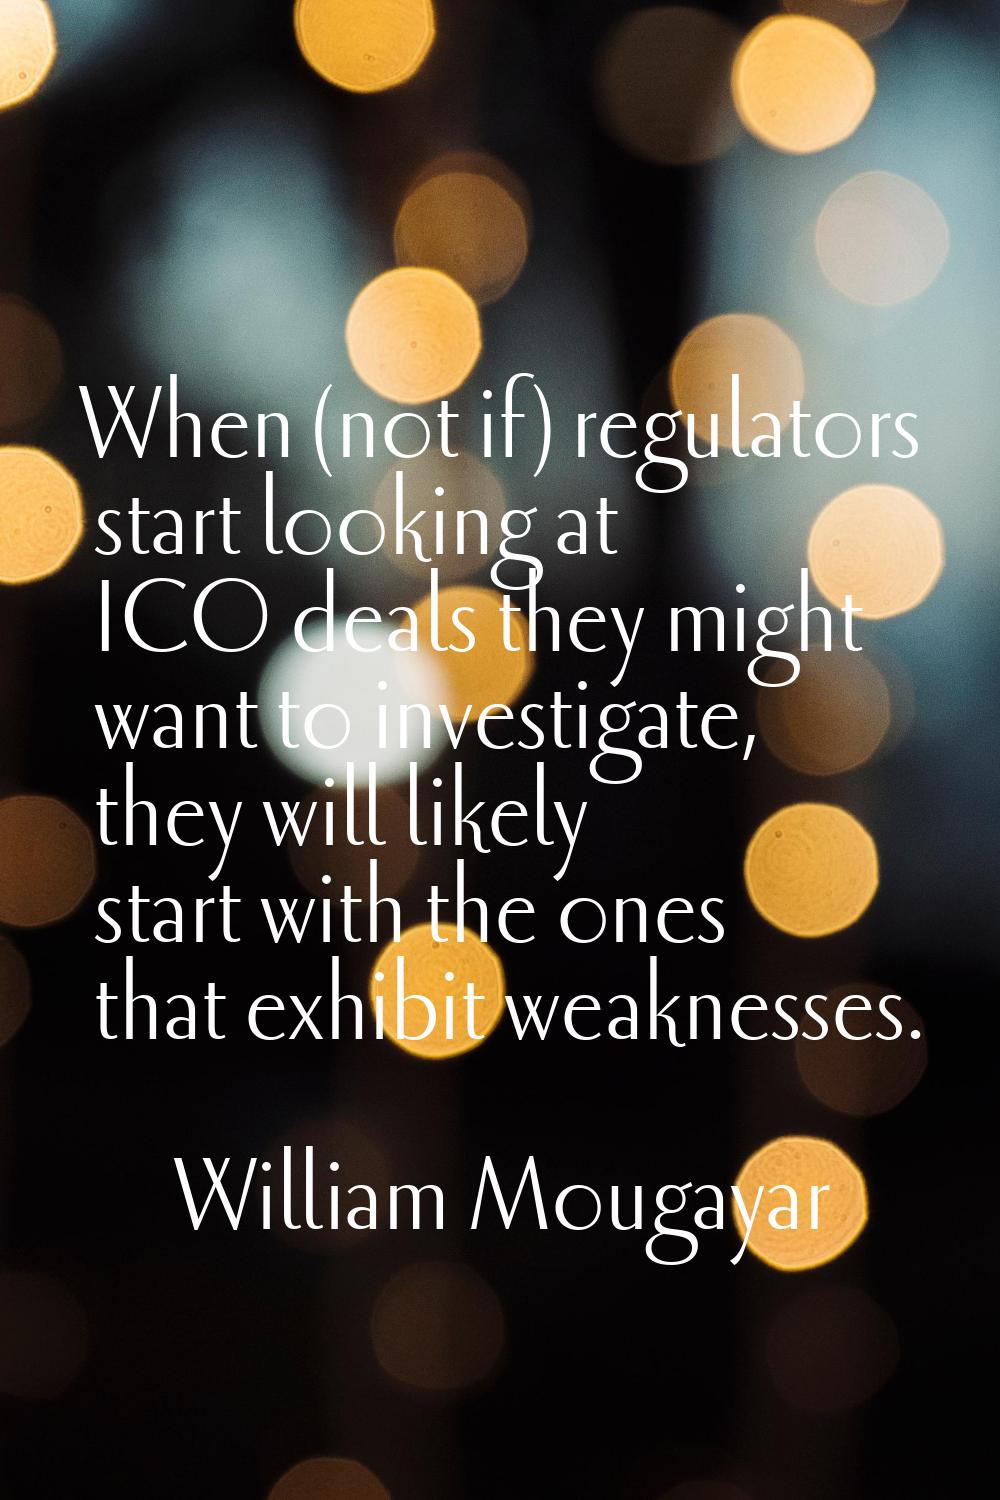 When (not if) regulators start looking at ICO deals they might want to investigate, they will likel